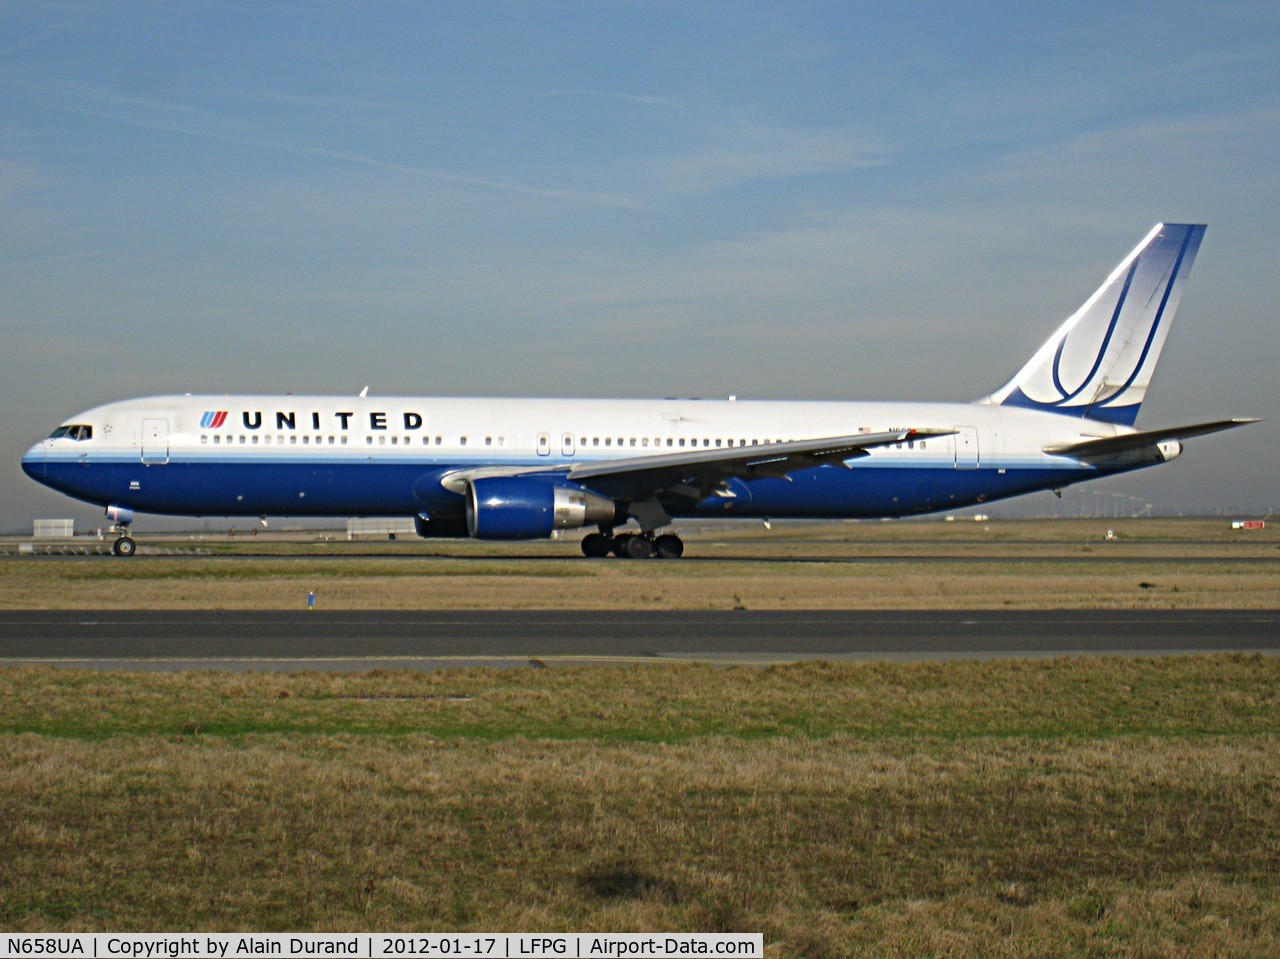 N658UA, 1993 Boeing 767-322 C/N 27113, Still clad in the dress designed in 2004, C/N 480 is also registered as fleet number 6358 and can accomodate F6C26Y151.